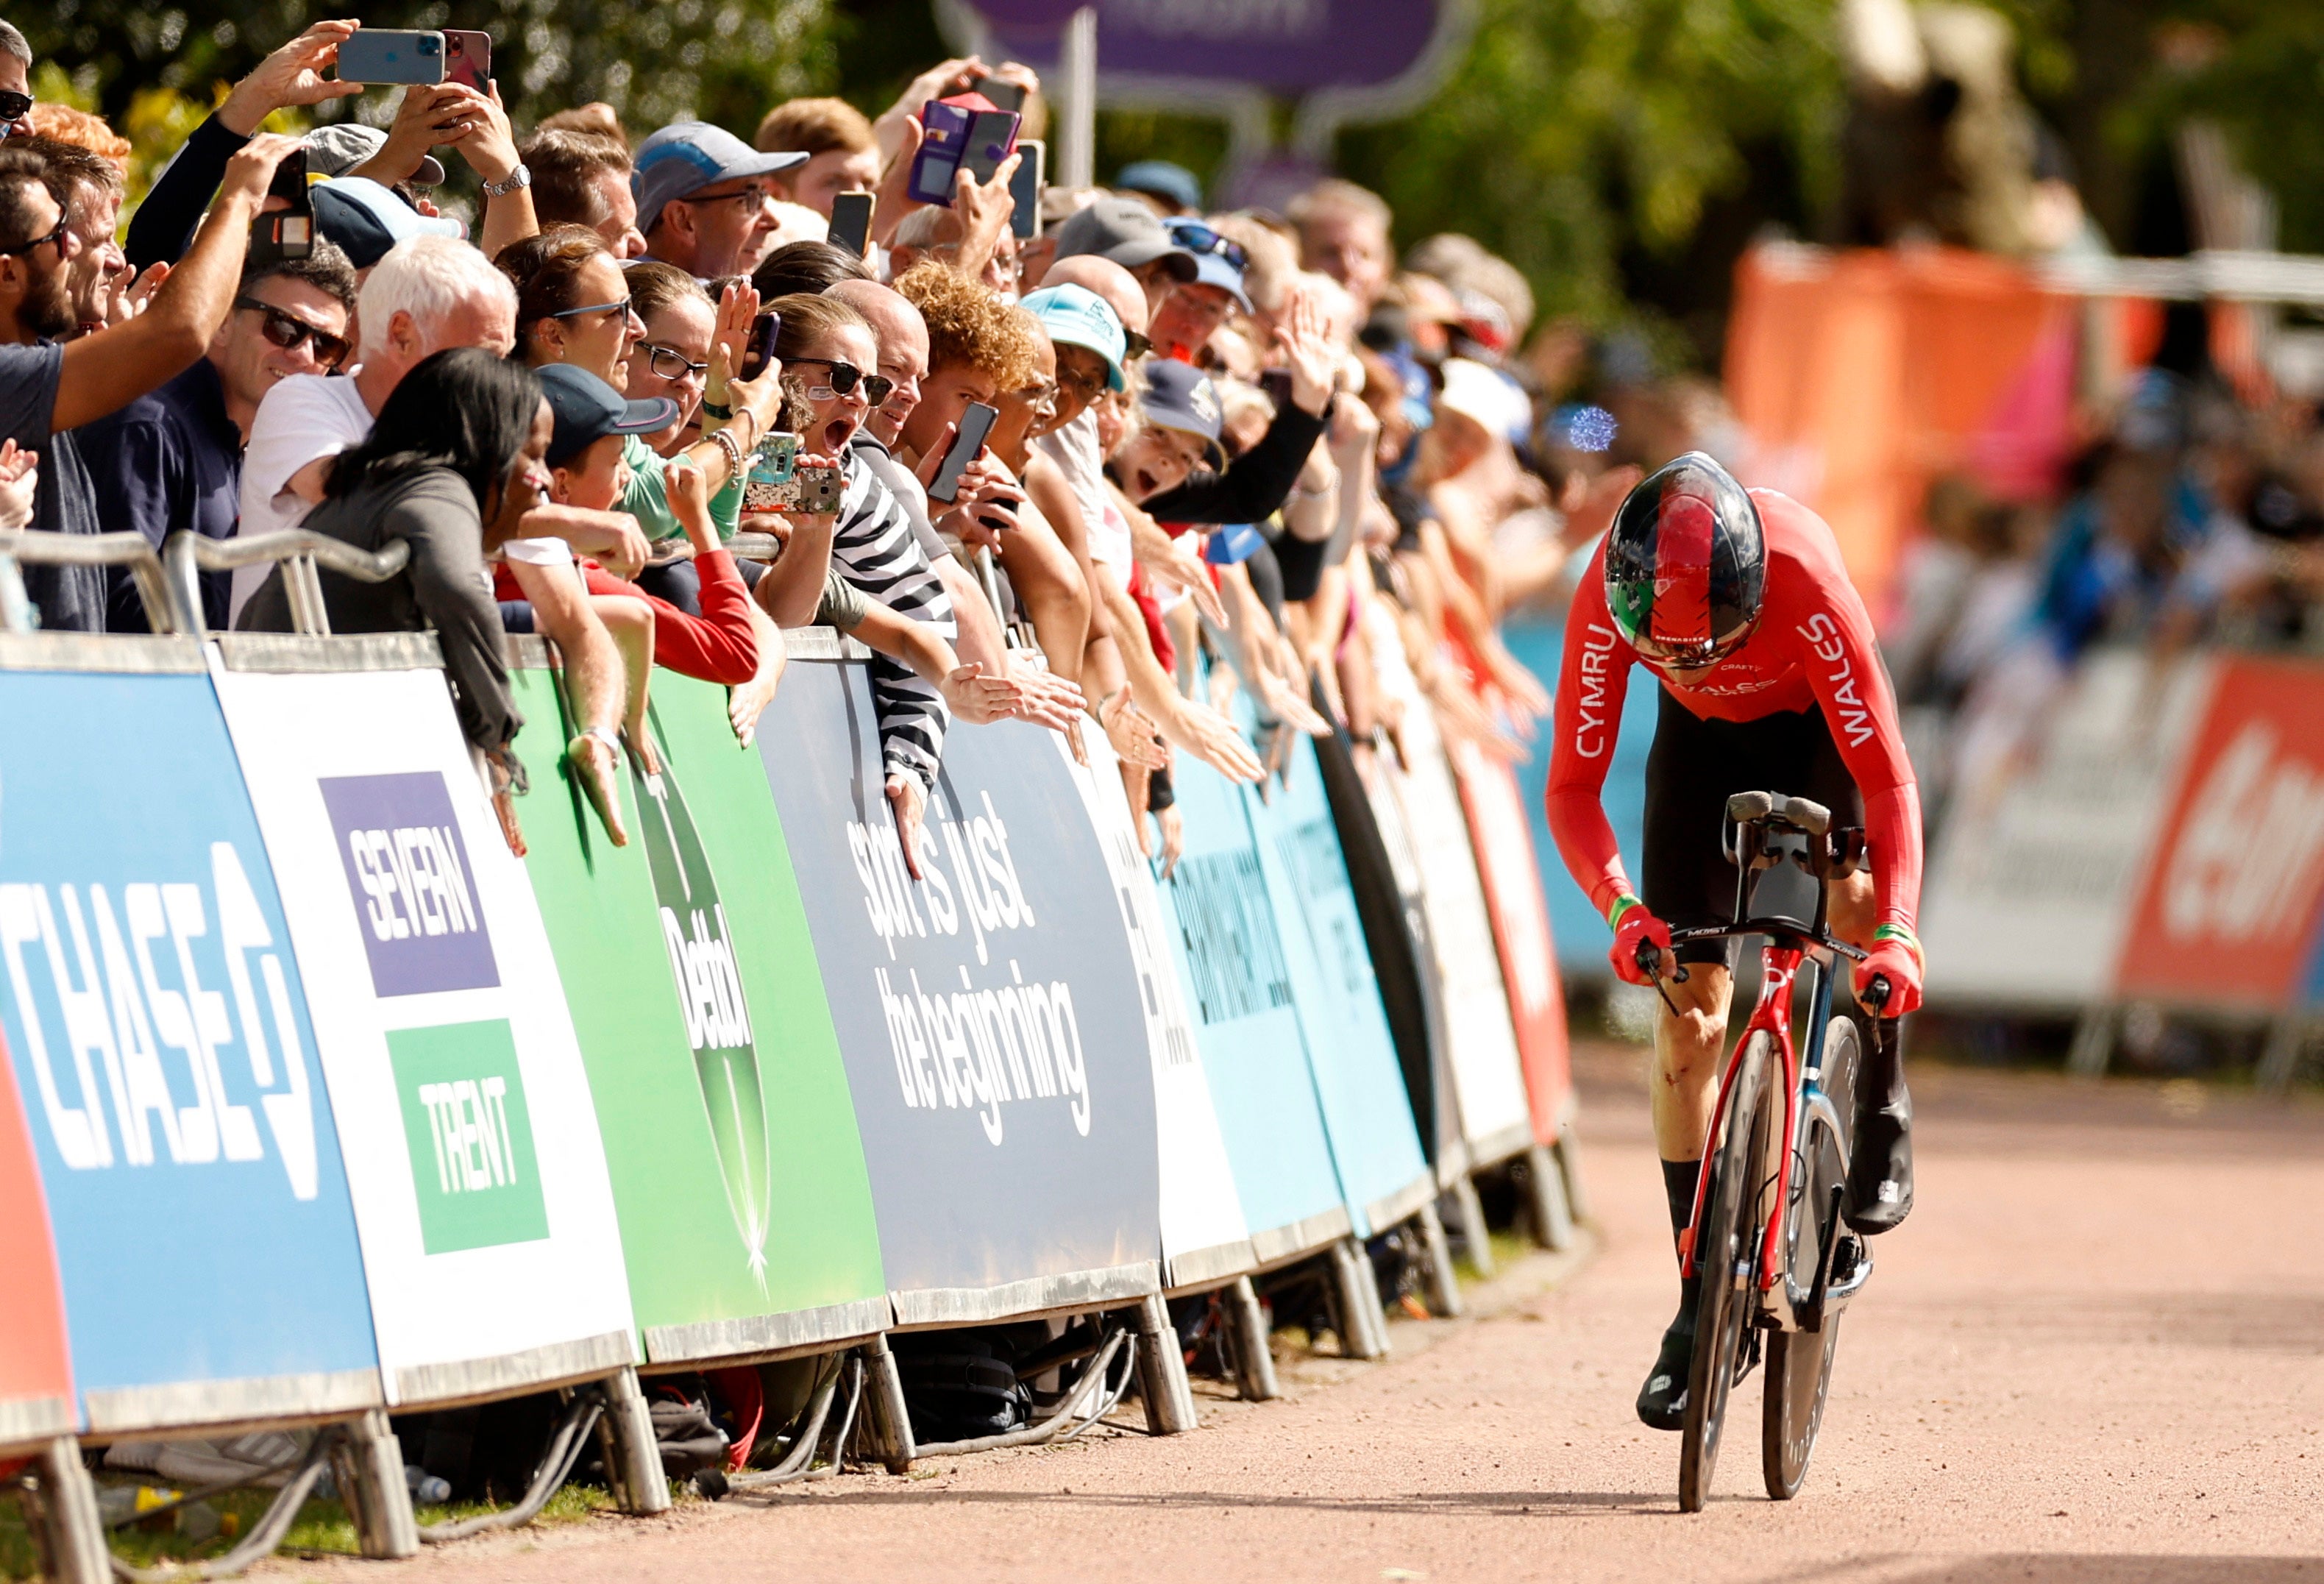 Geraint Thomas nears the finish at West Park